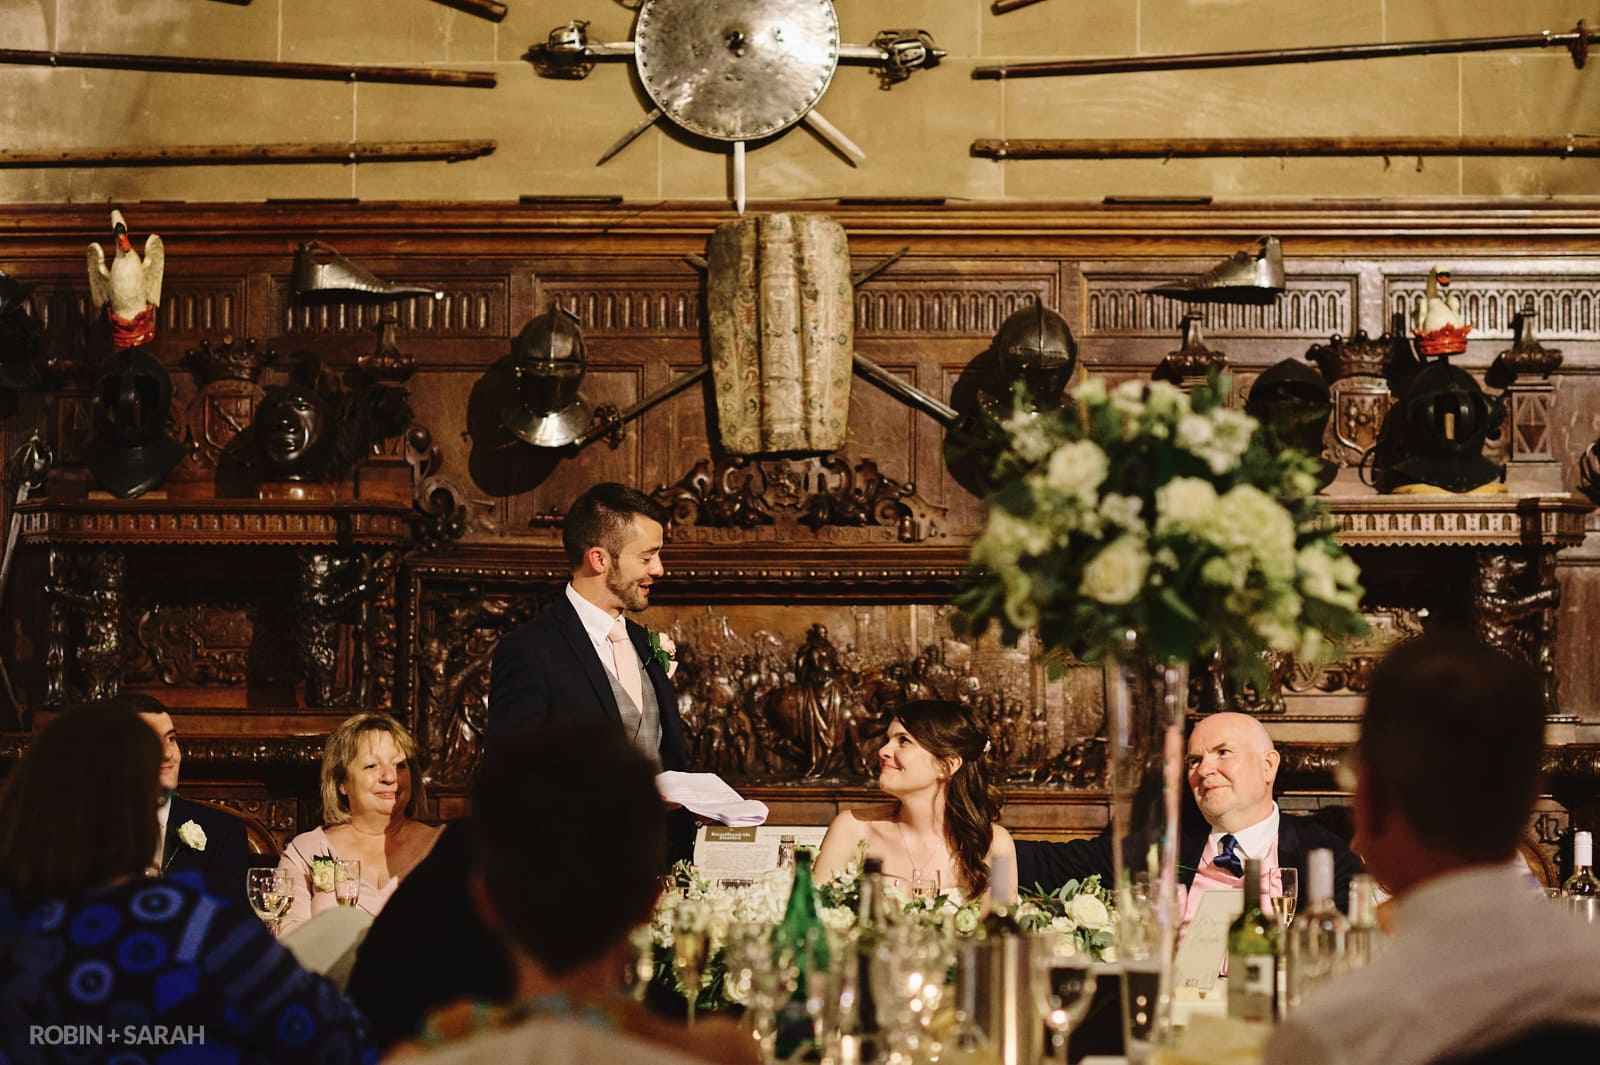 Groom delivers wedding speech in Great Hall at Warwick Castle